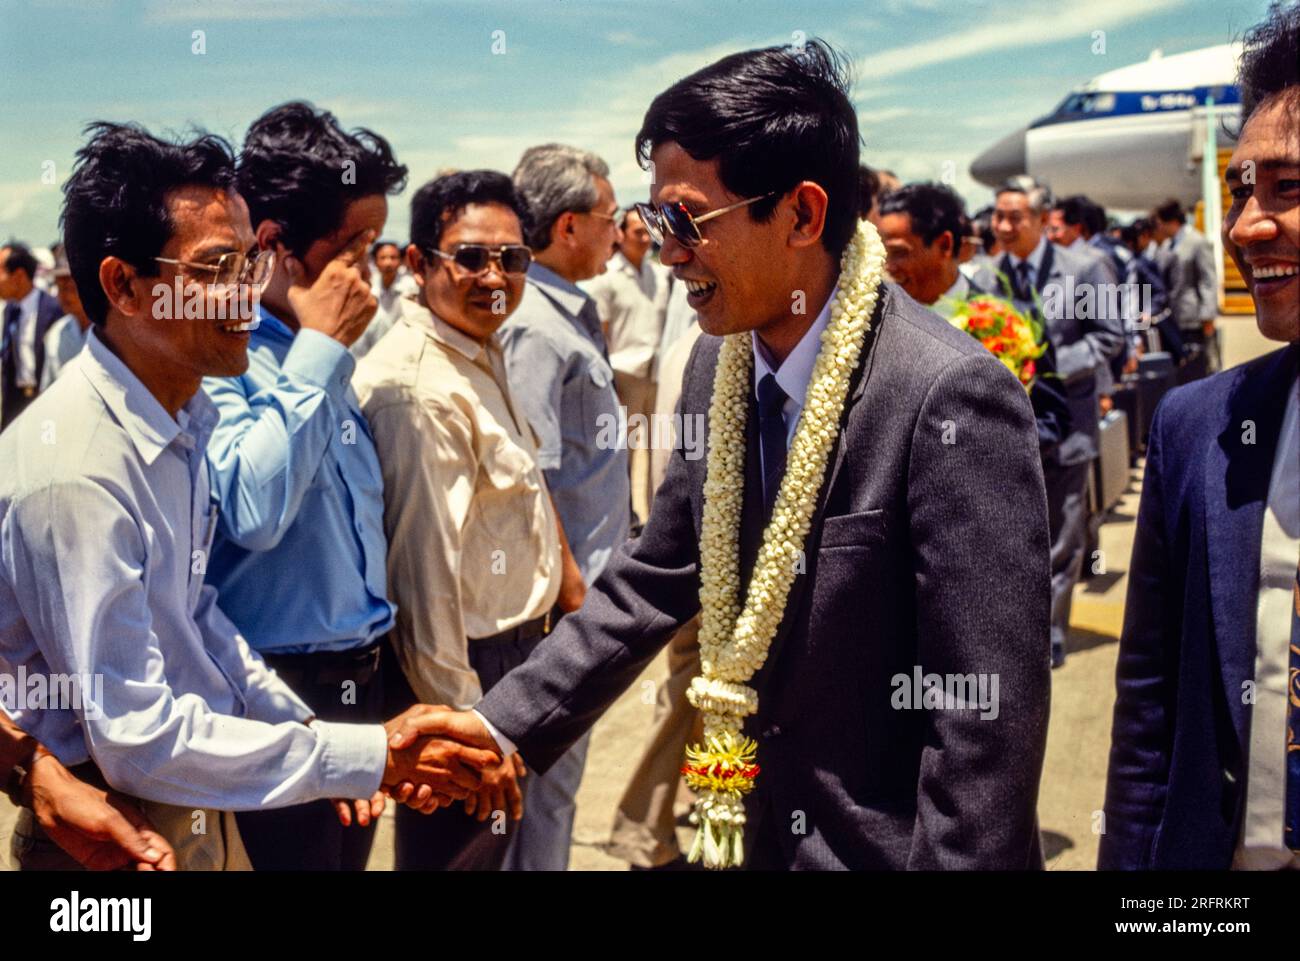 Hun Sen with floral garland around his neck, Cambodian political leader & premier of Cambodia, shaking hands with officials at the airport on his return to the government, 1987. Stock Photo